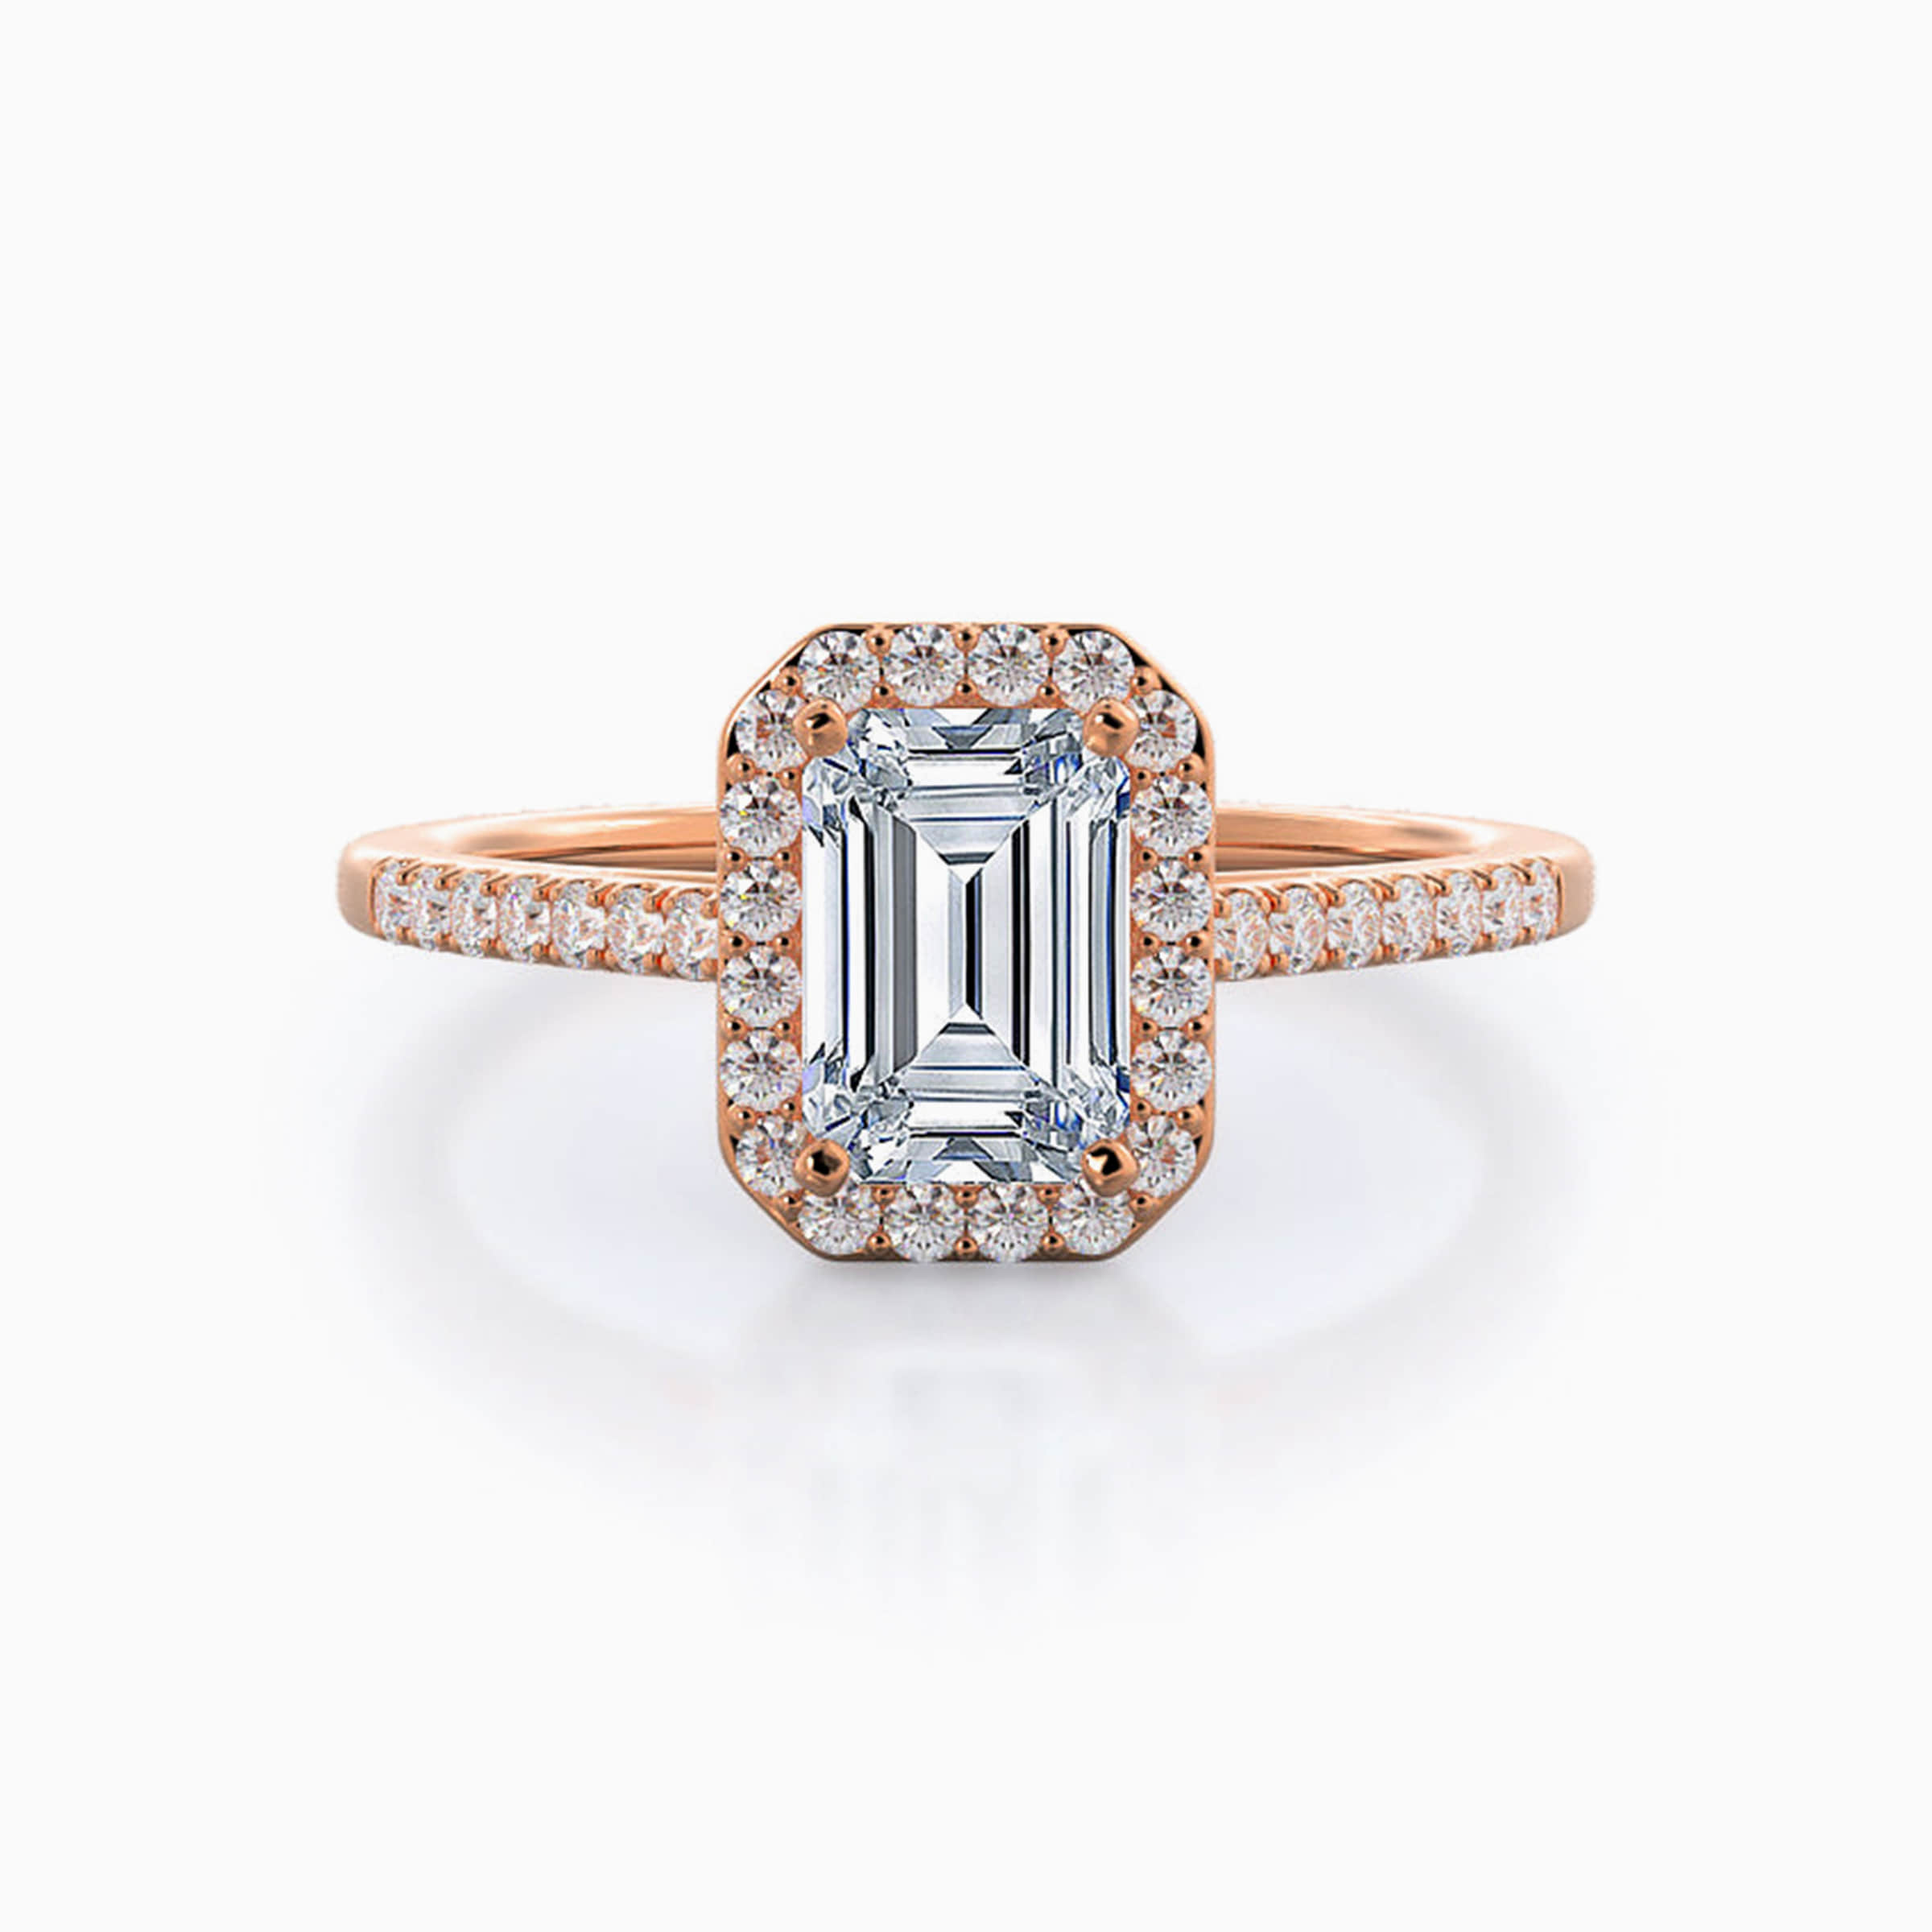 Darry Ring 3 carat emerald cut halo engagement ring in rose gold